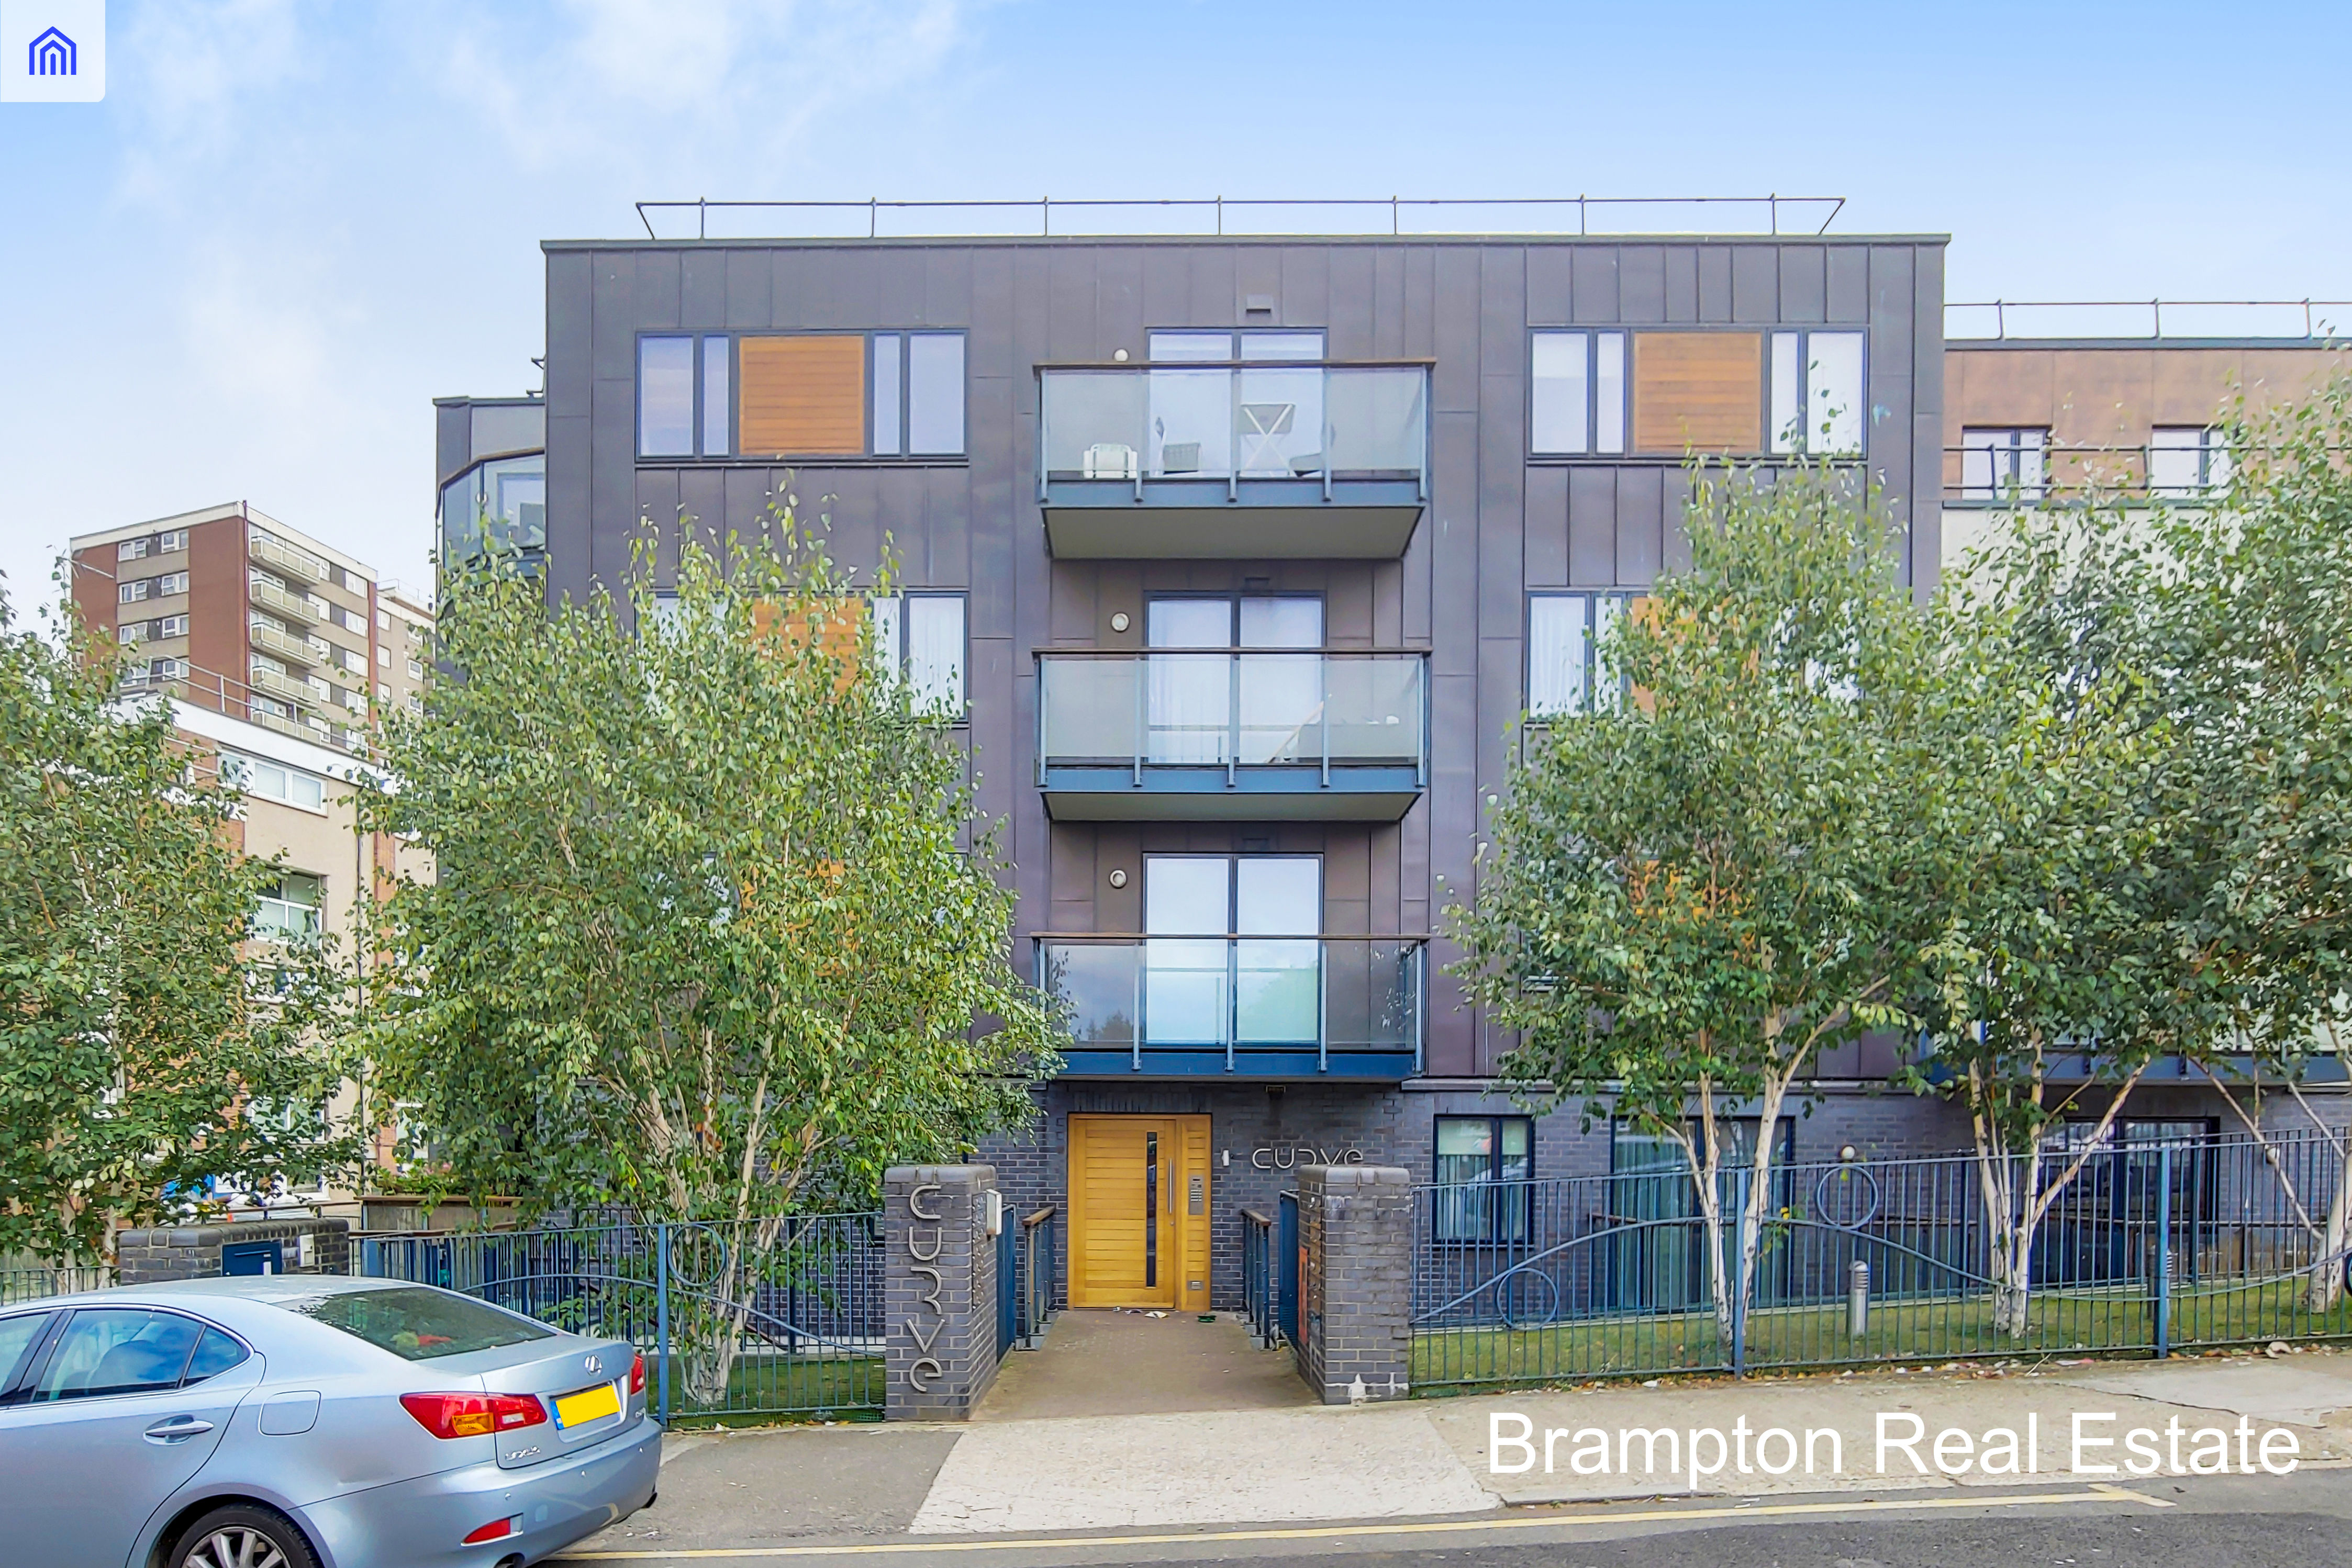 2 bed Flat for rent in Hendon. From Brampton Real Estate